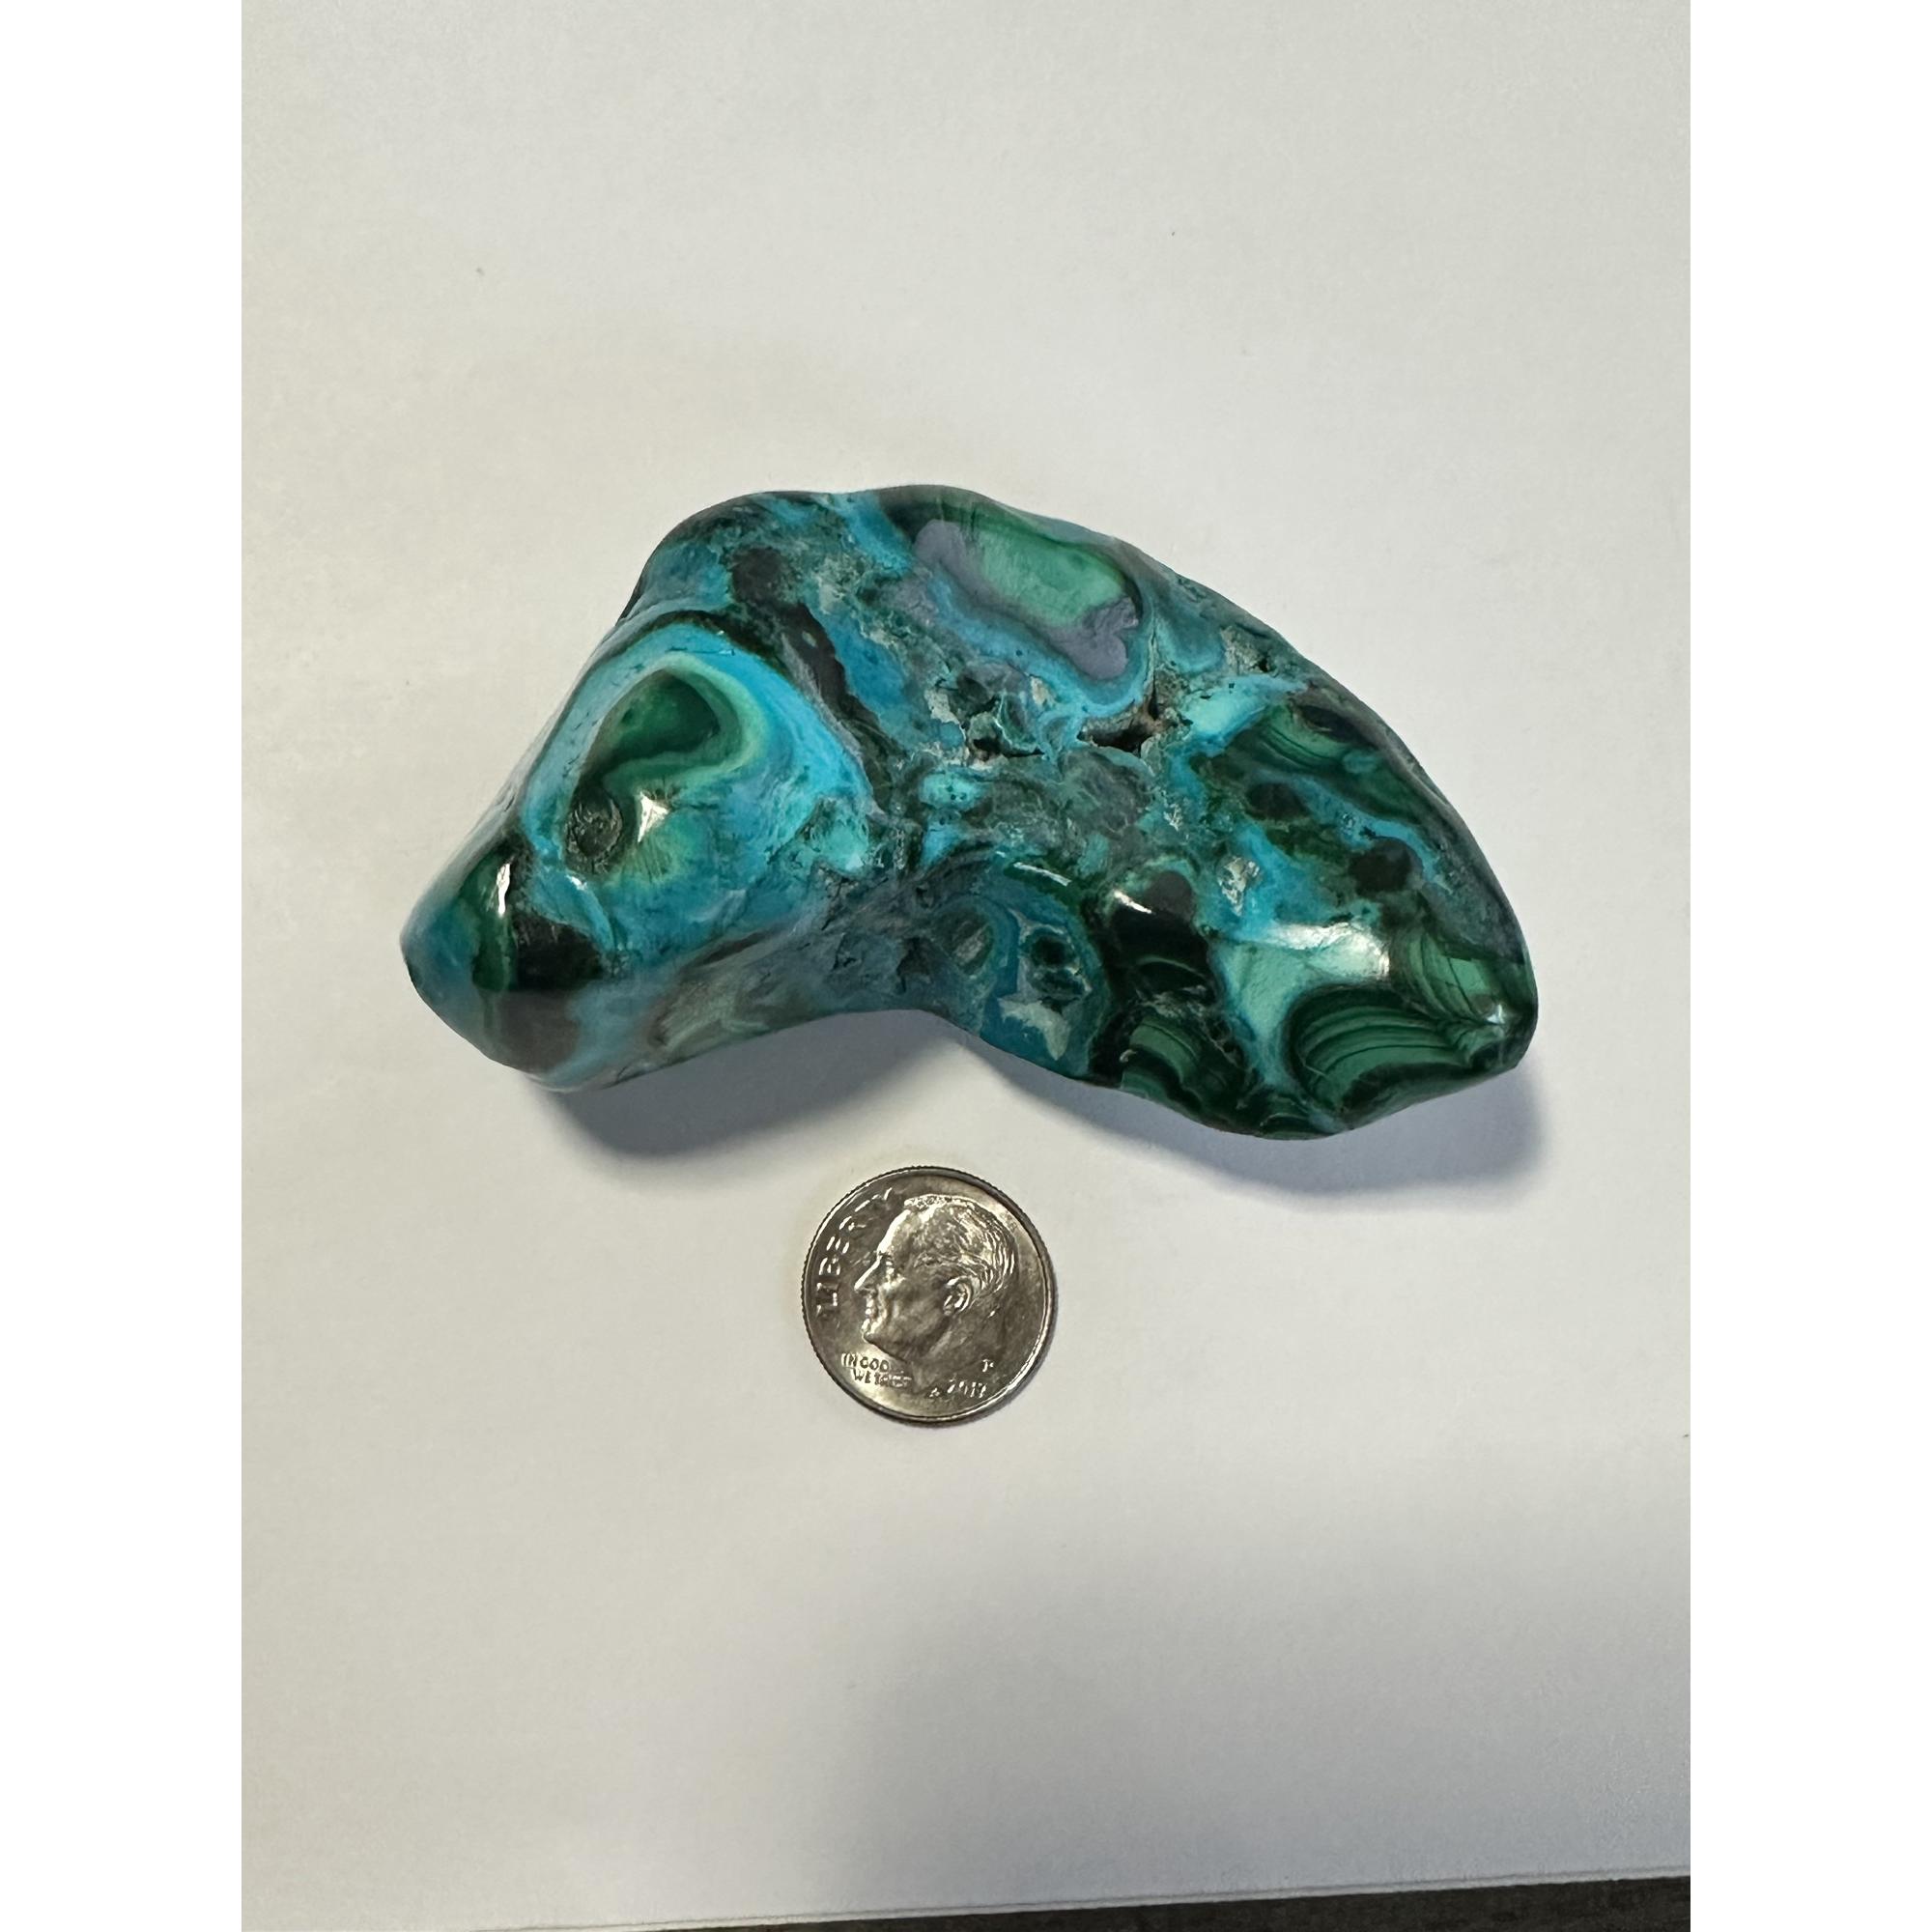 Chrysocolla with Malachite, amazing mixtures of blues and greens Prehistoric Online